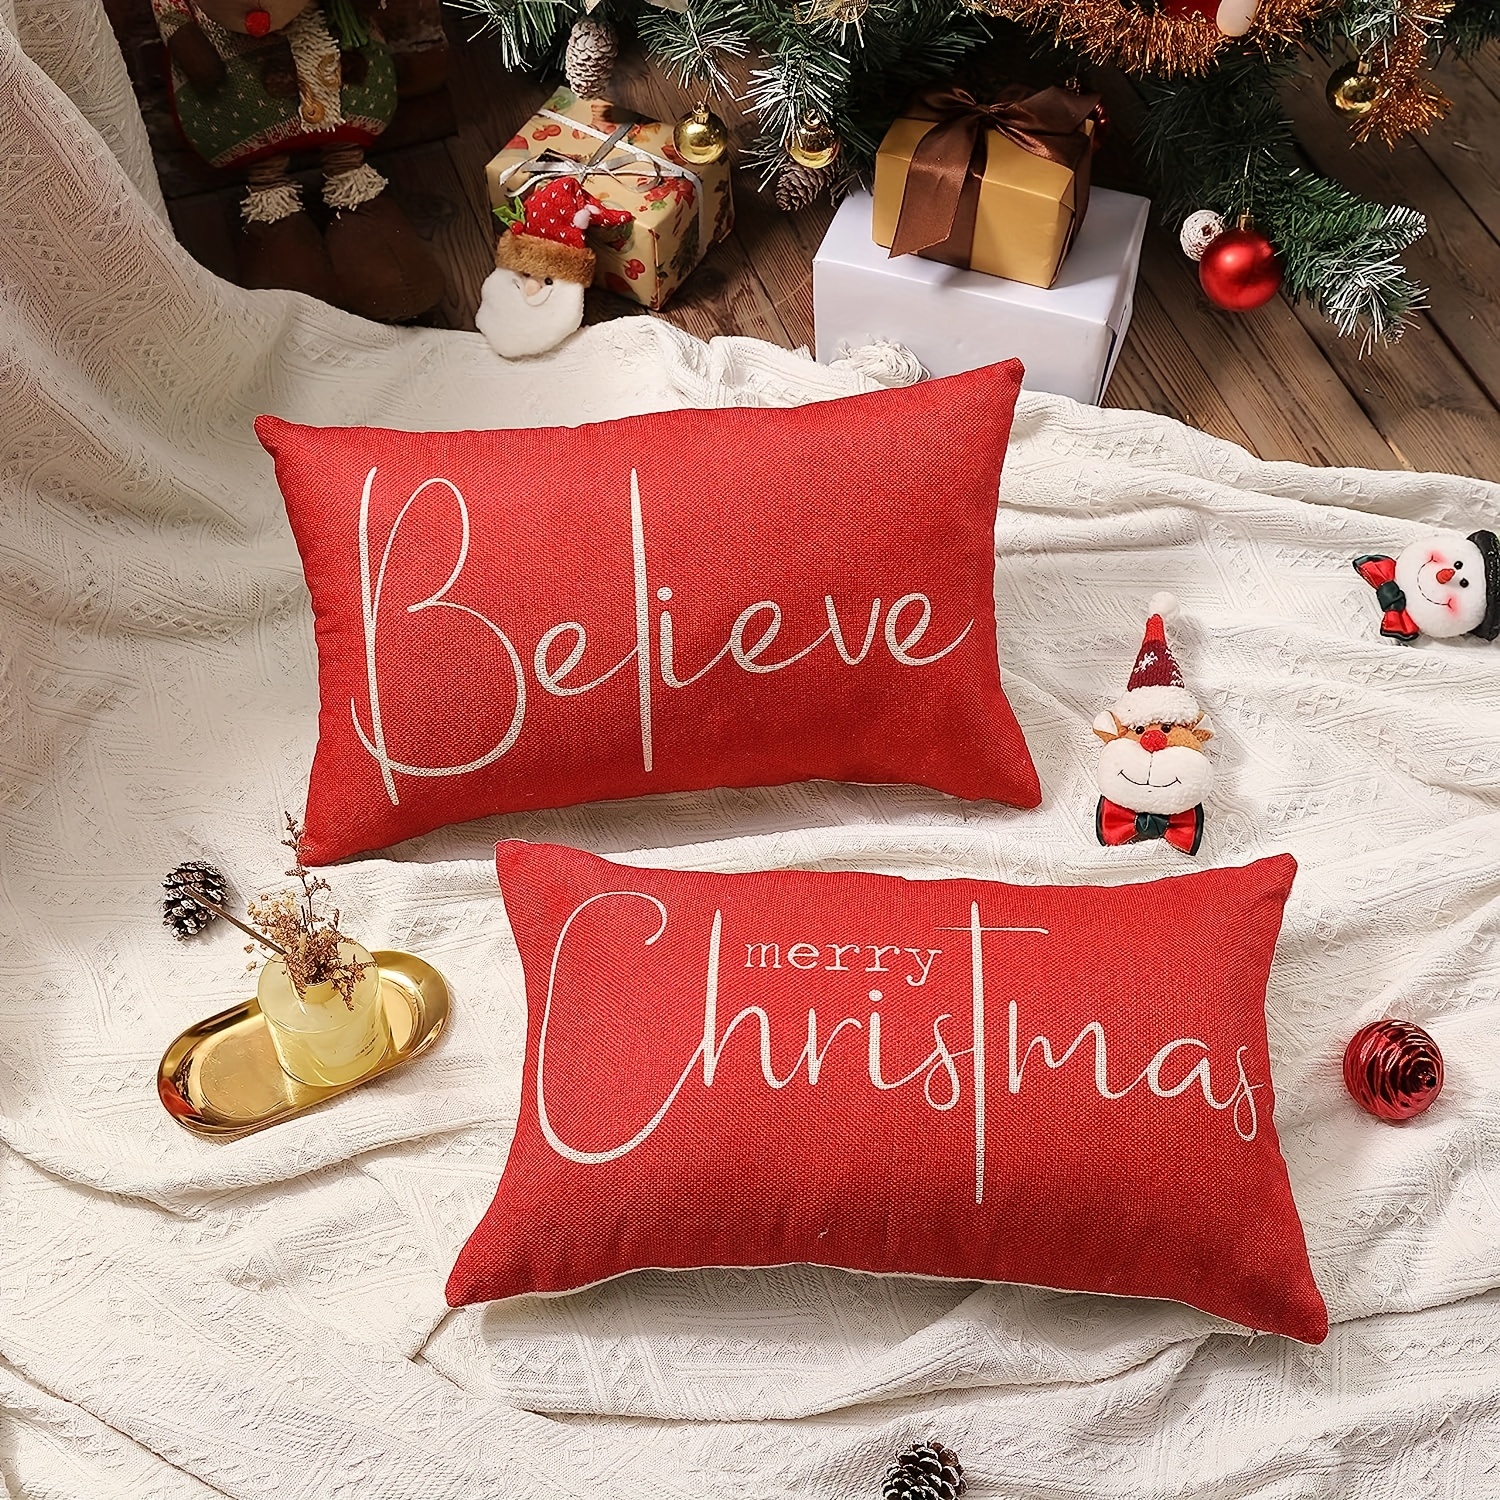 Set Of 4 Red Christmas Pillow Covers [17.7x17.7 Inches] With Reindeer,  Snowflake And Letter Print Pattern For Holiday Farmhouse Decor, Car Sofa Bed  Decoration; Home & Outdoor [pillow Core Not Included]